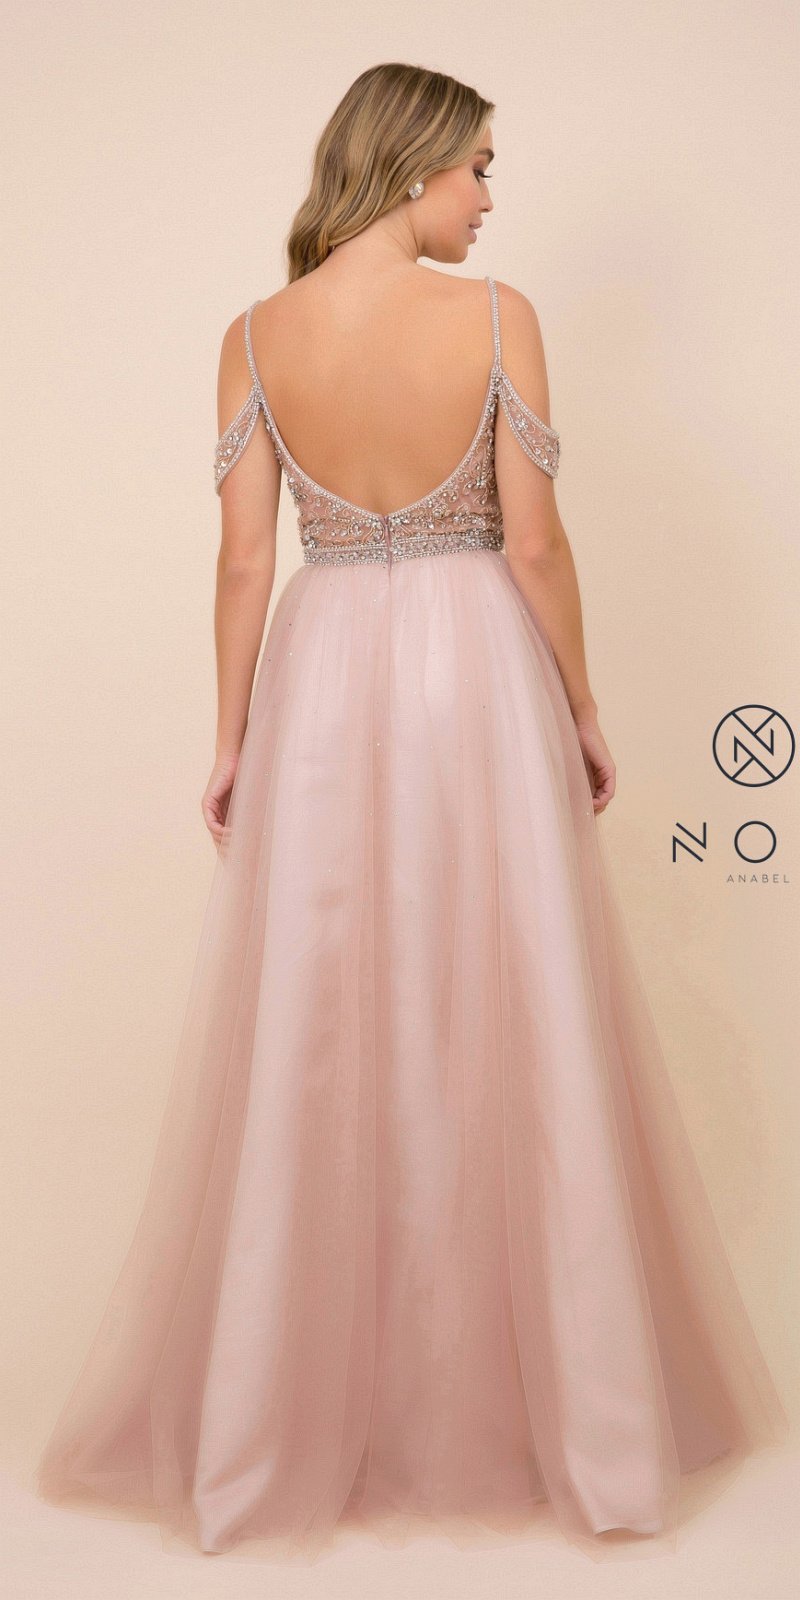 Tan Long Prom Dress with Illusion Embellished Bodice